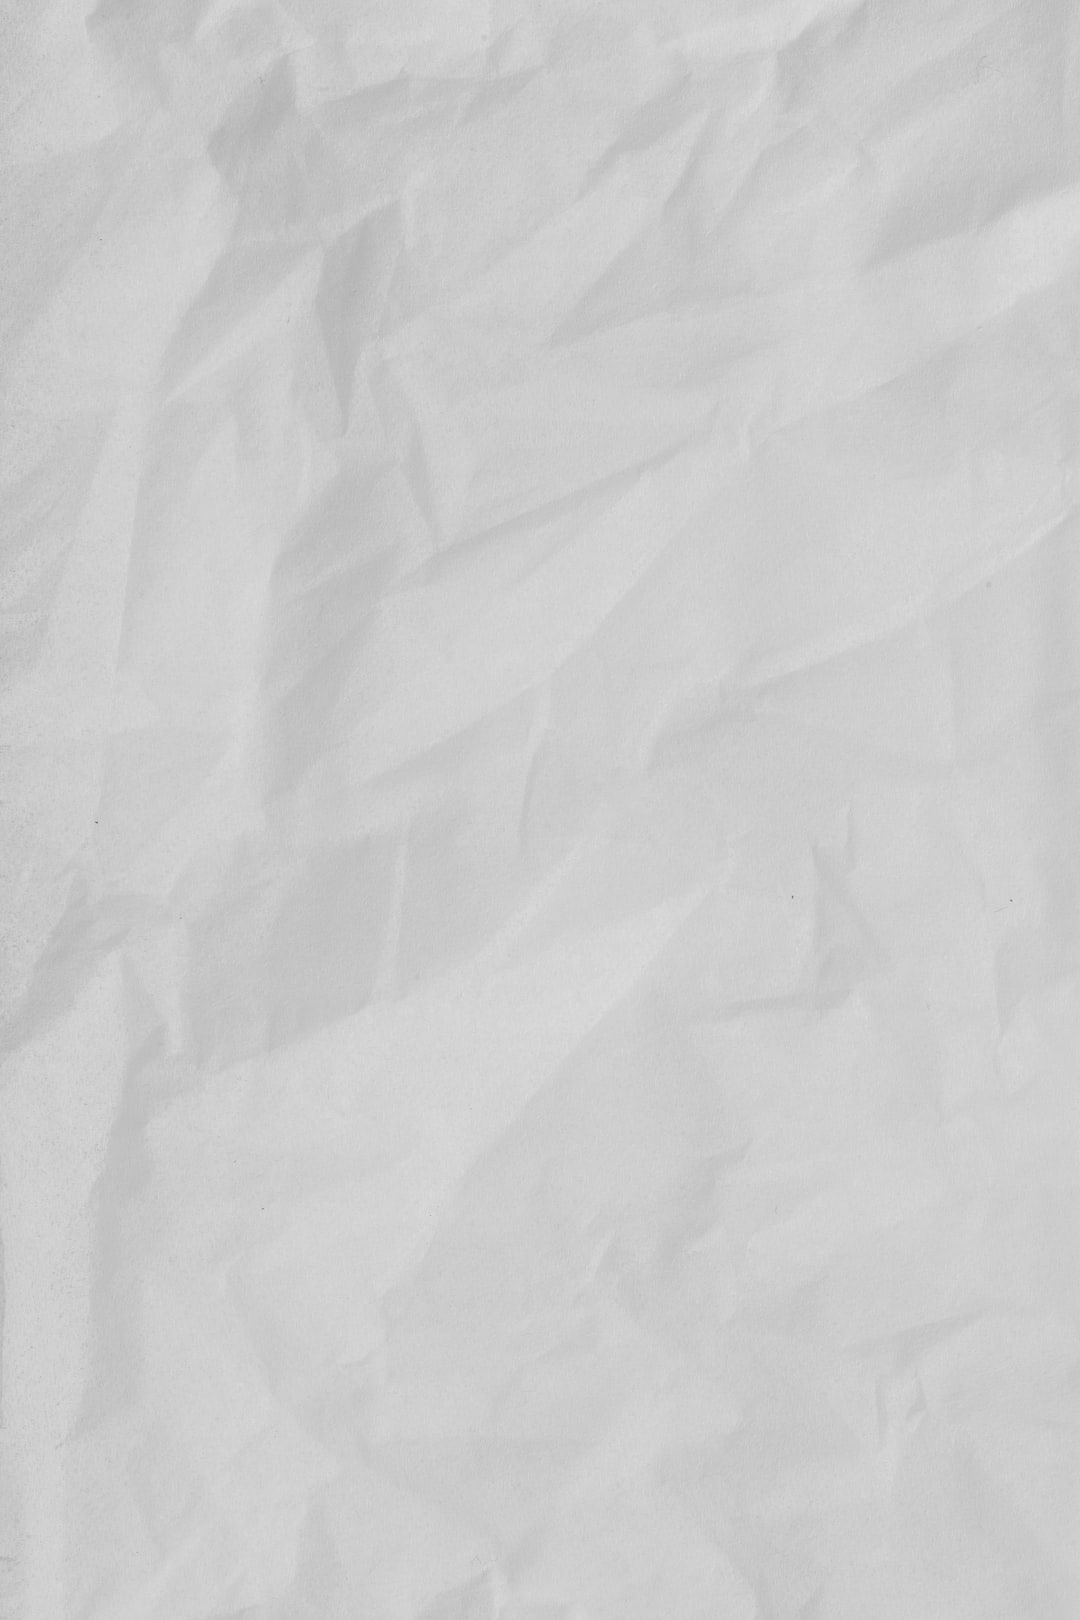 Paper Background Image: Download HD Background